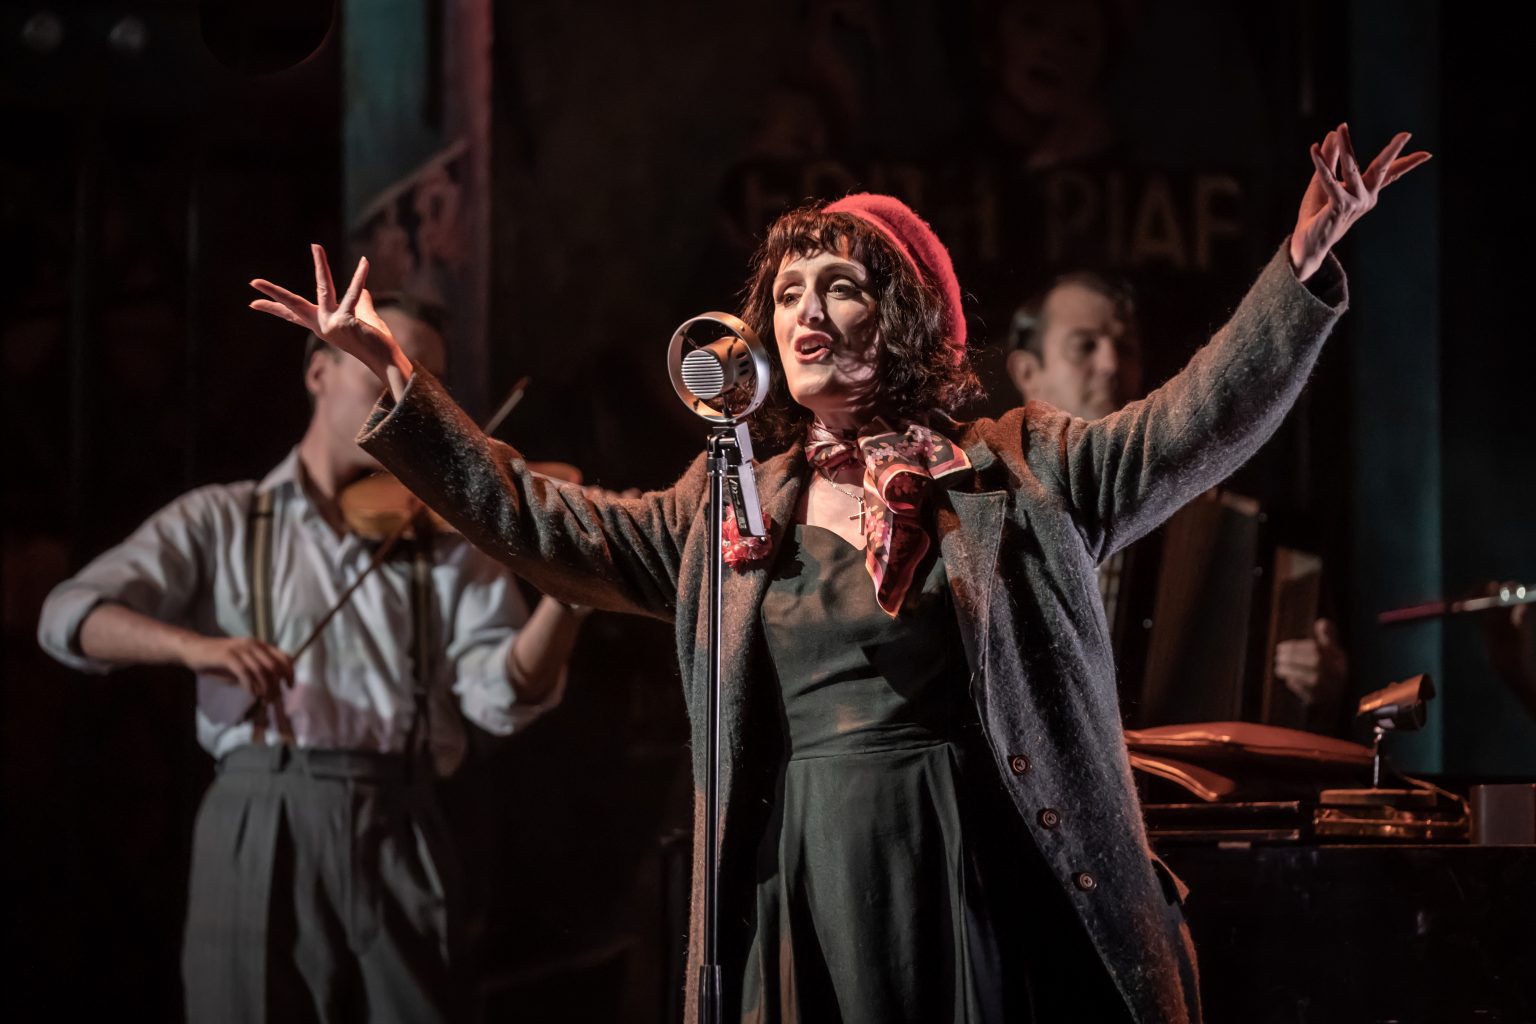 Nottingham Playhouse's Piaf, starring Jenna Russell, made available on demand